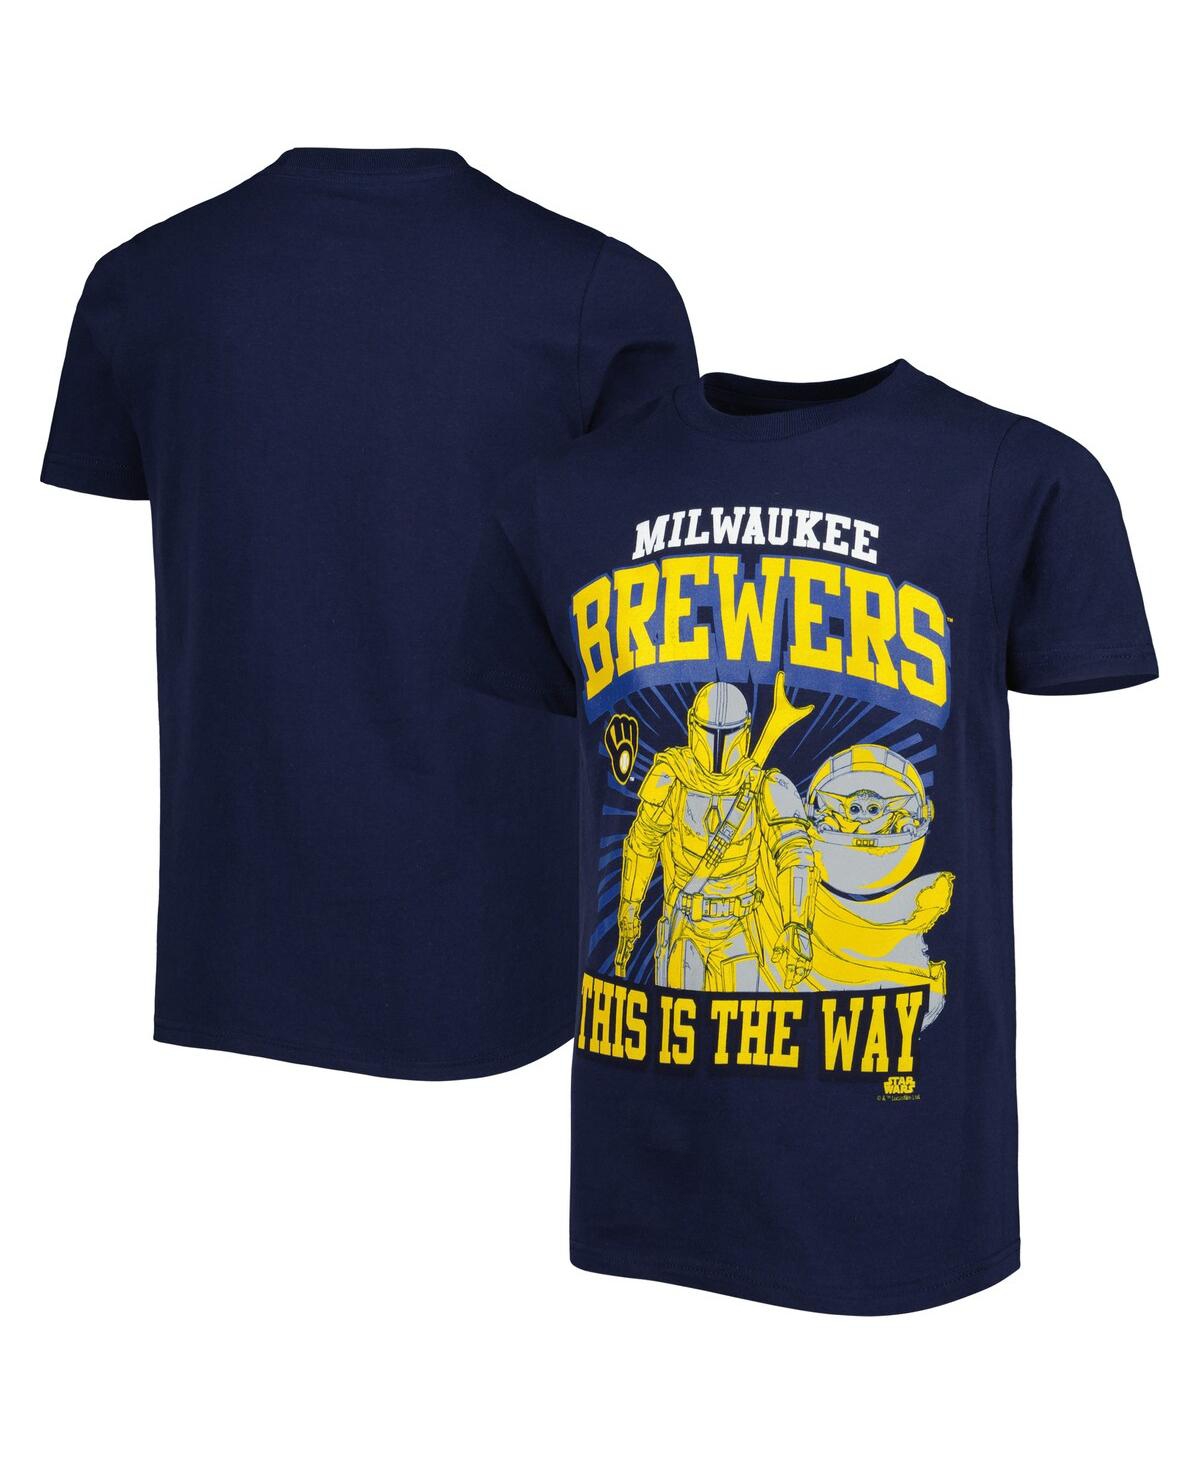 Outerstuff Kids' Big Boys And Girls Navy Milwaukee Brewers Star Wars This Is The Way T-shirt